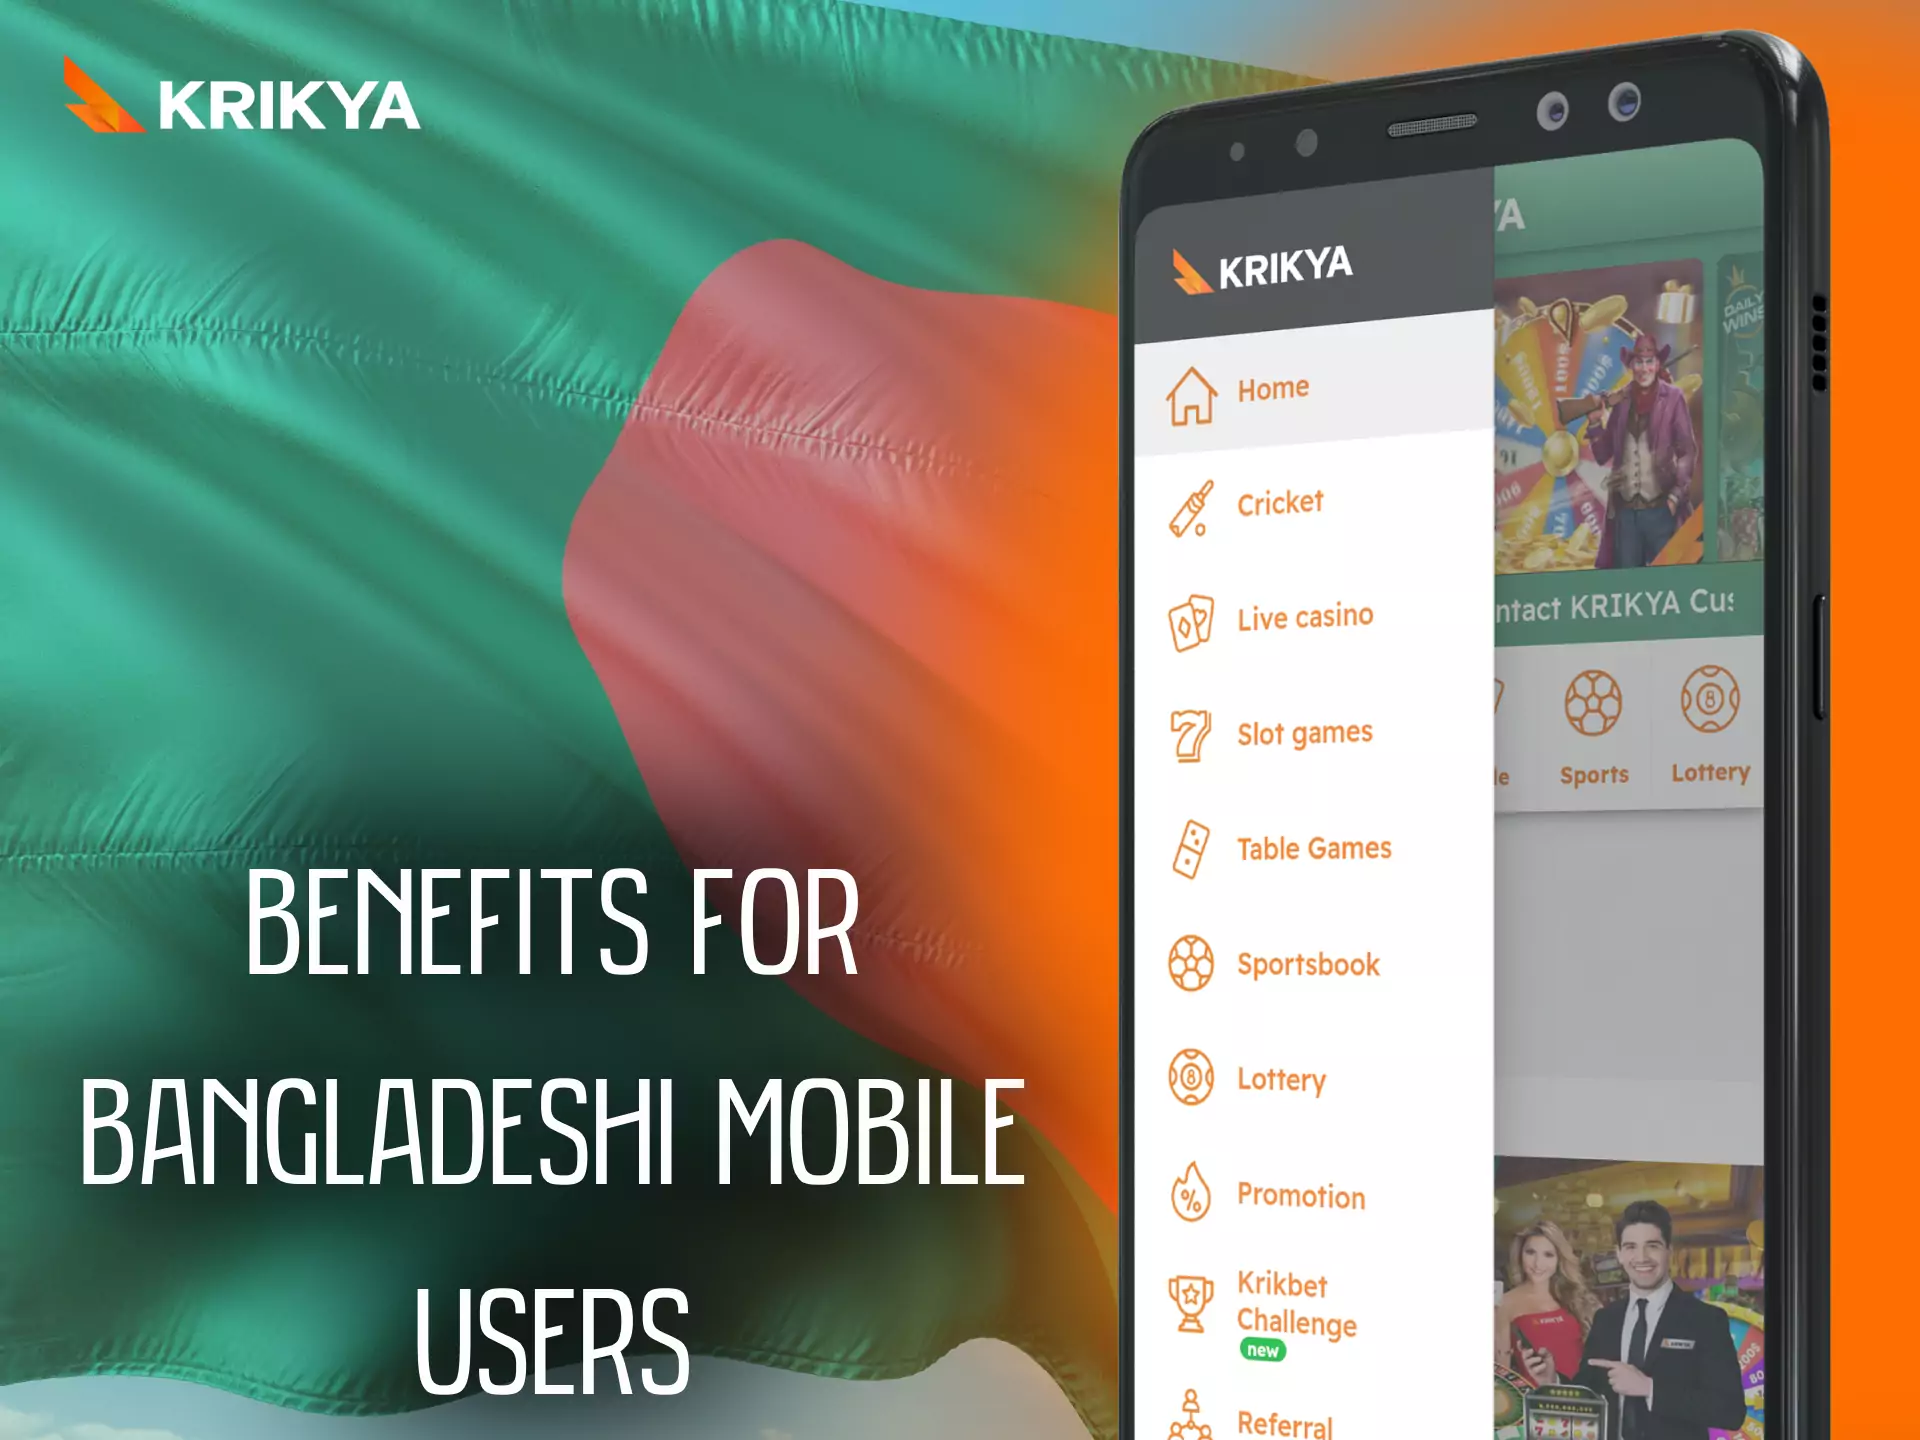 Krikya offers many convenient features and bonuses for players from Bangladesh.